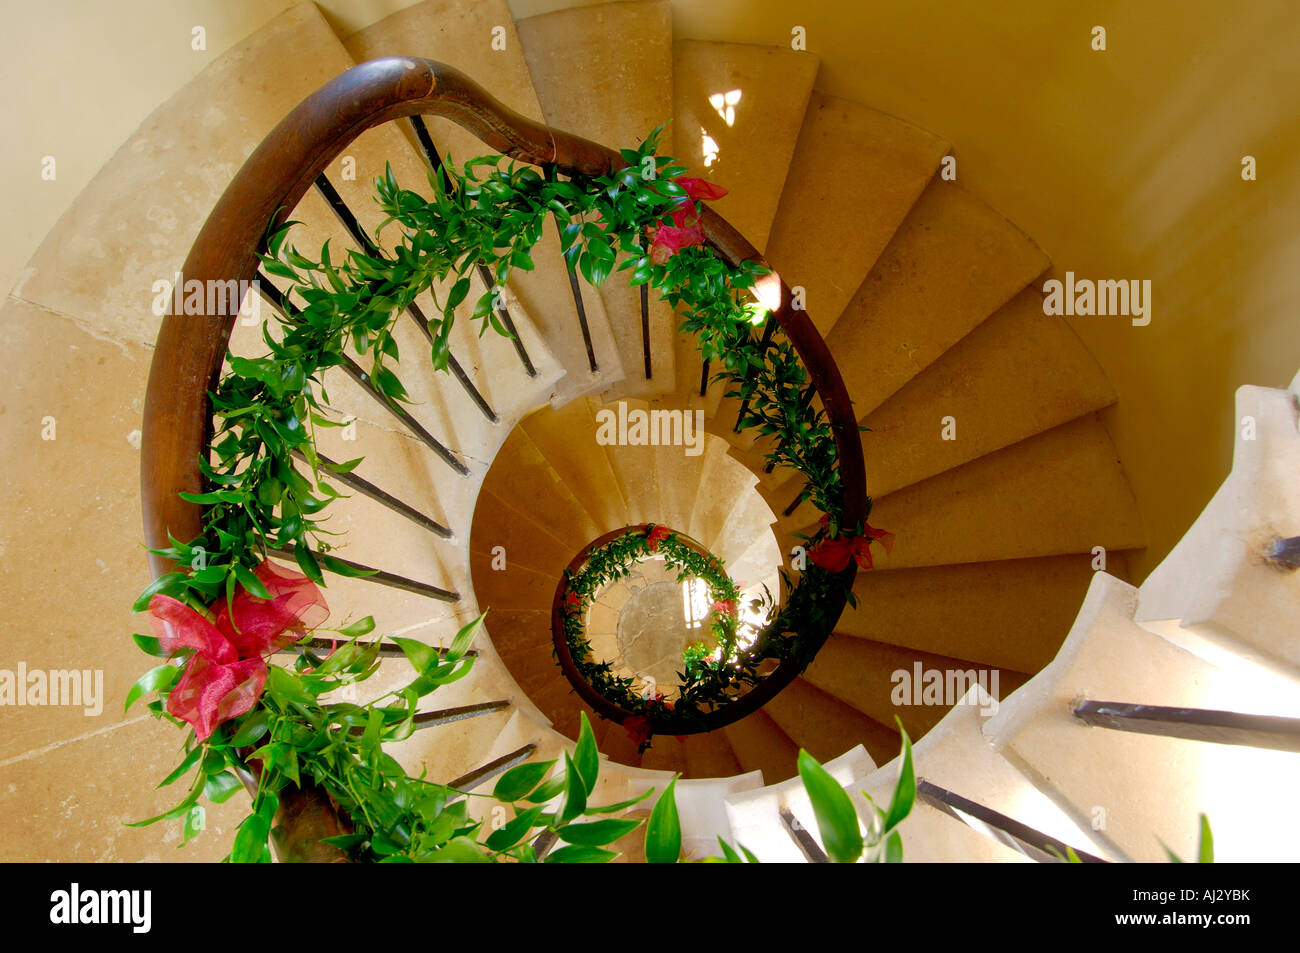 A spiral stone staircase with a wooden banister decorated with leaves and flowers for a wedding ceremony Stock Photo